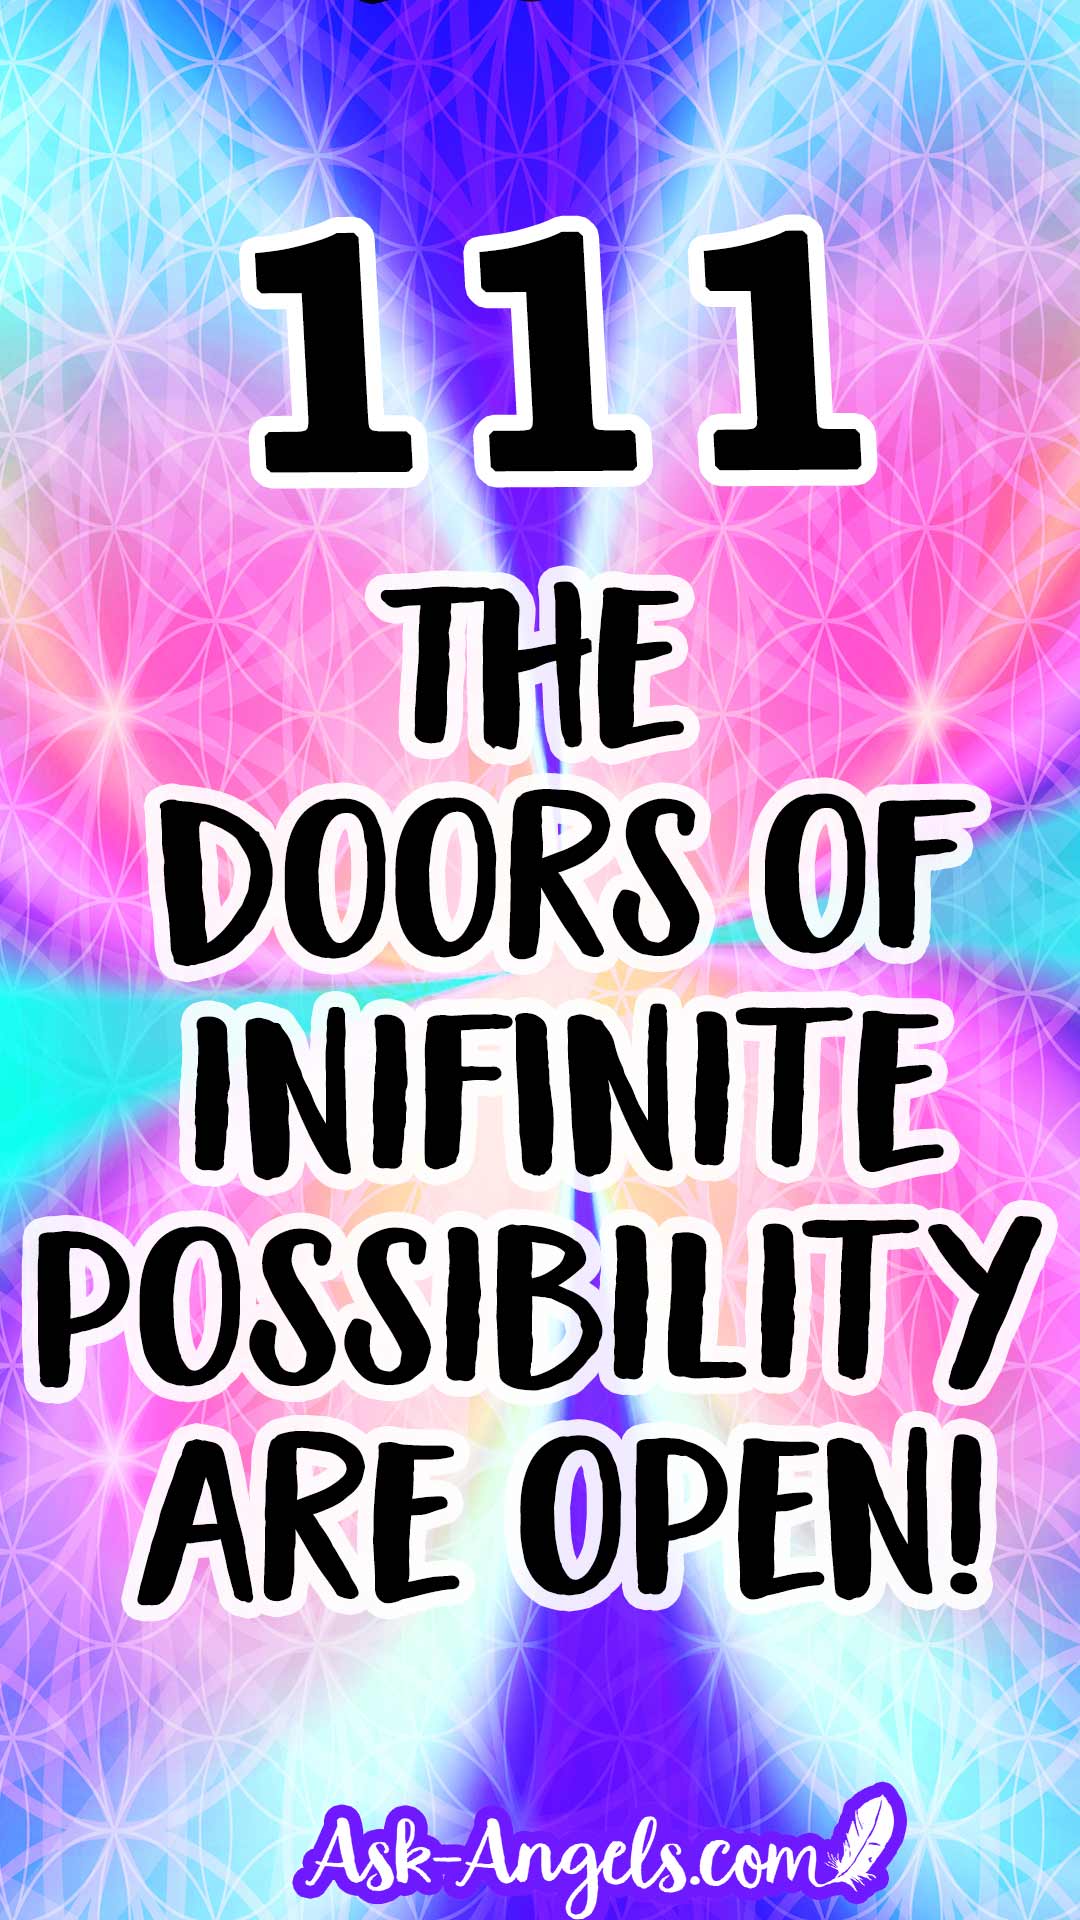 111 - The doors of infinite possibility are open